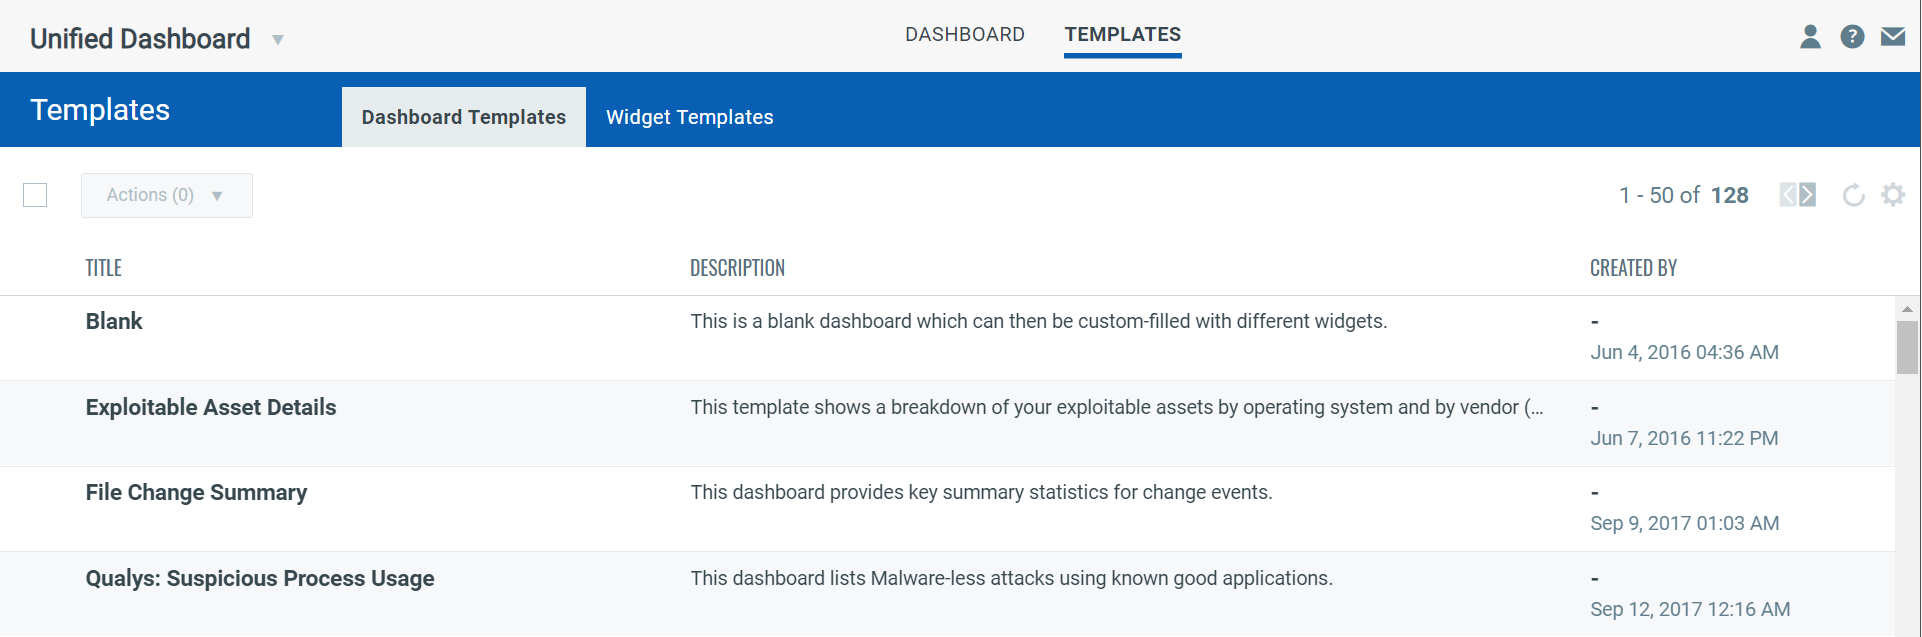 List of user-defined dashboard templates.